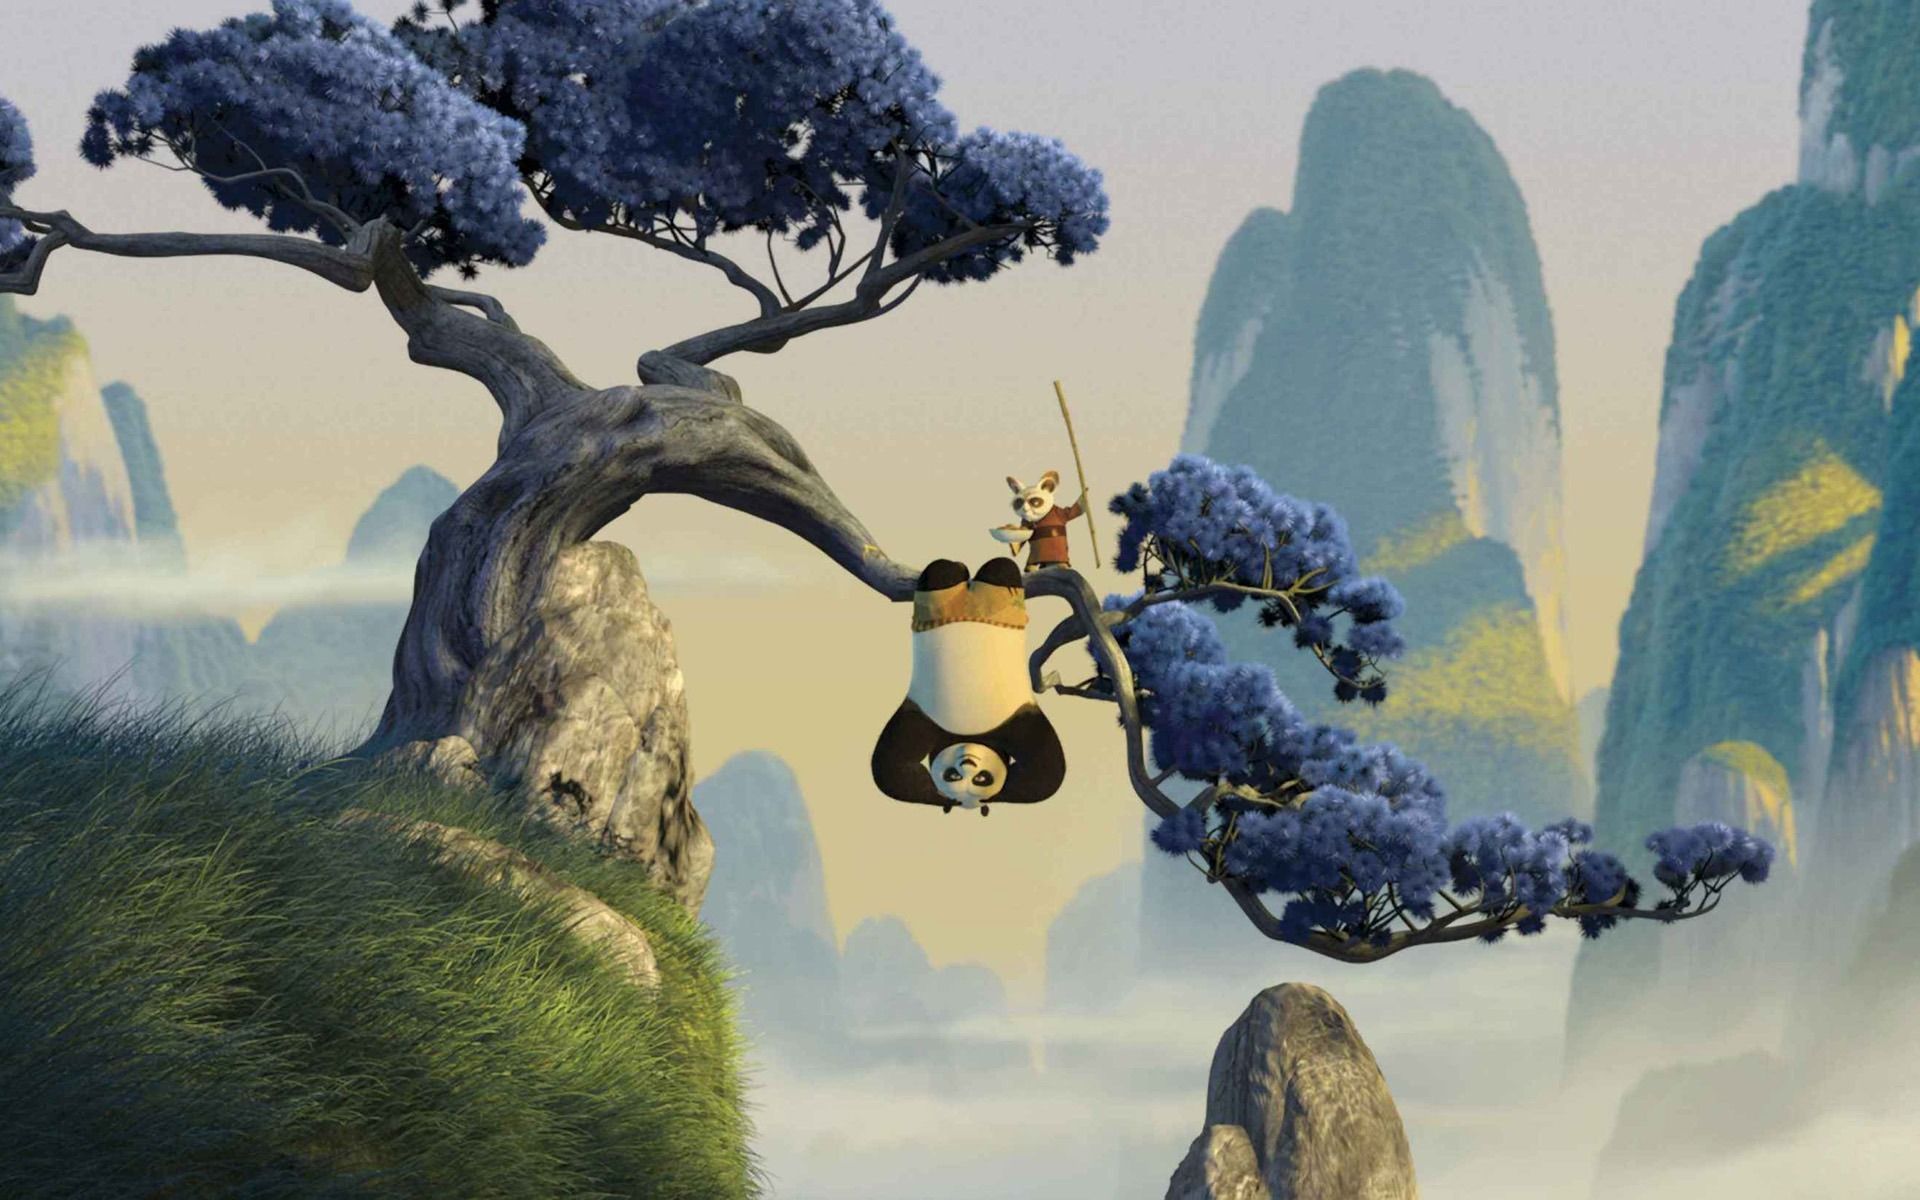 Master Oogway Wallpapers